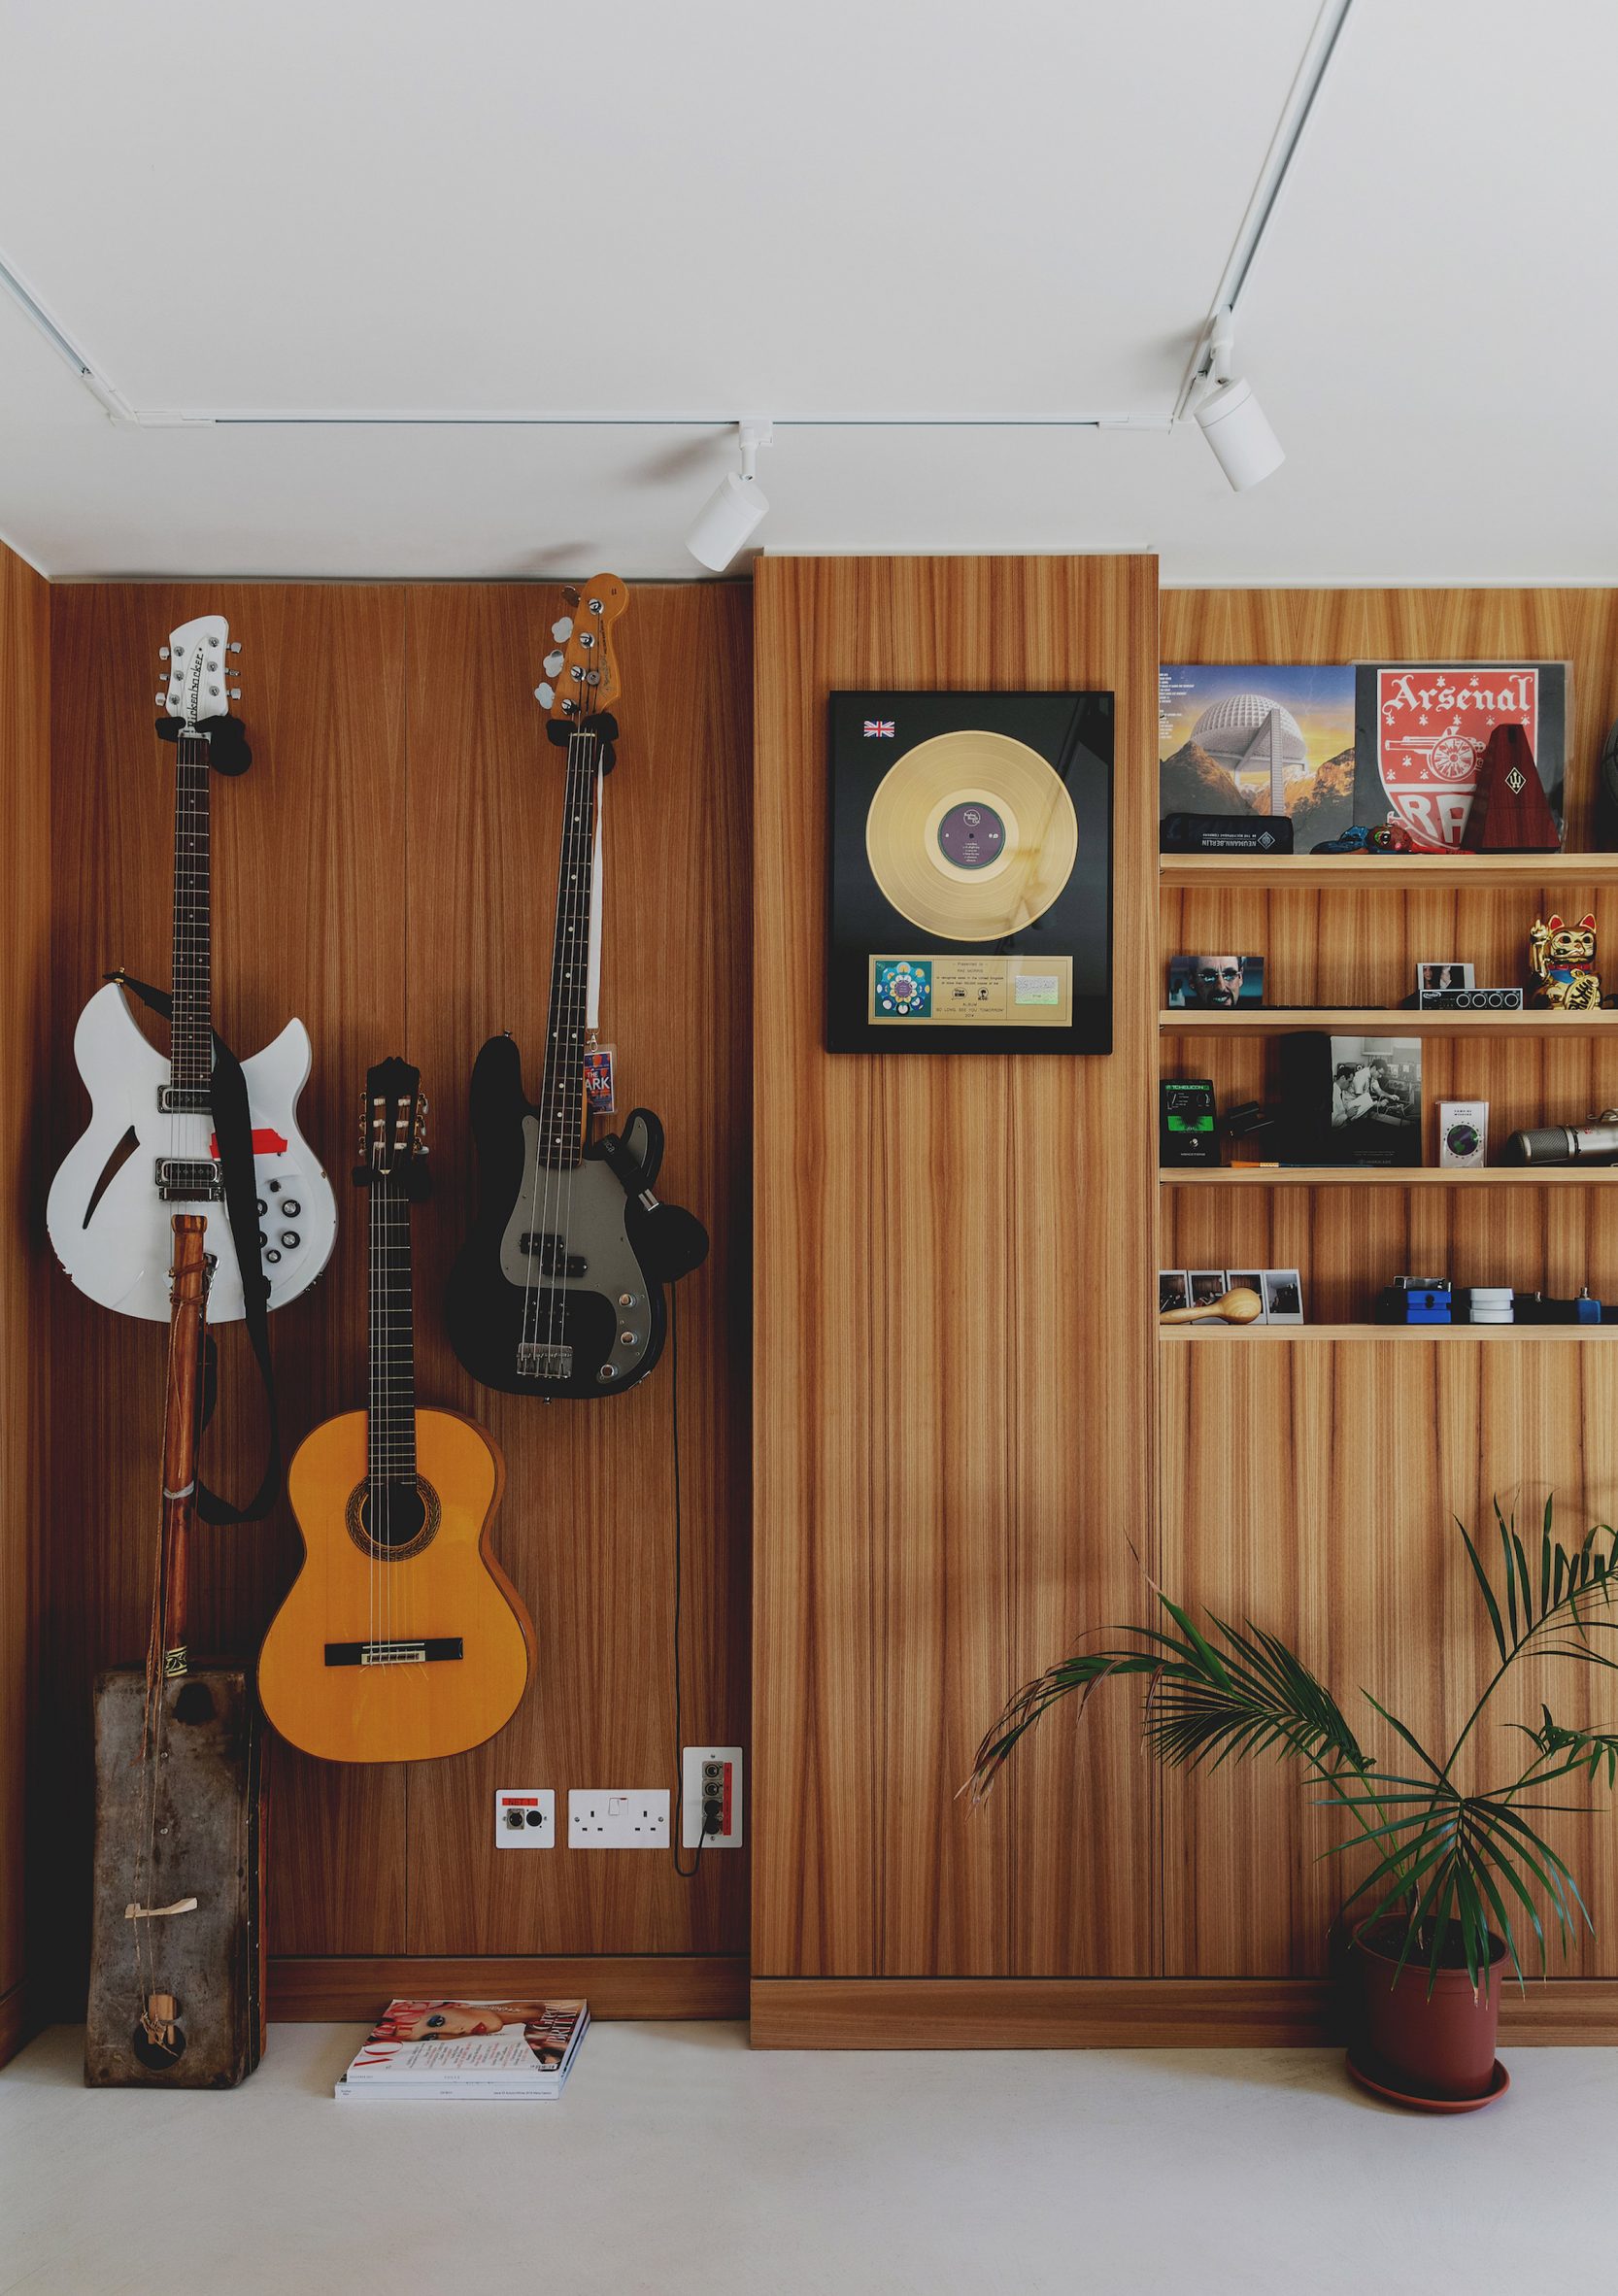 The 1970s-style house features a recording studio and writing room